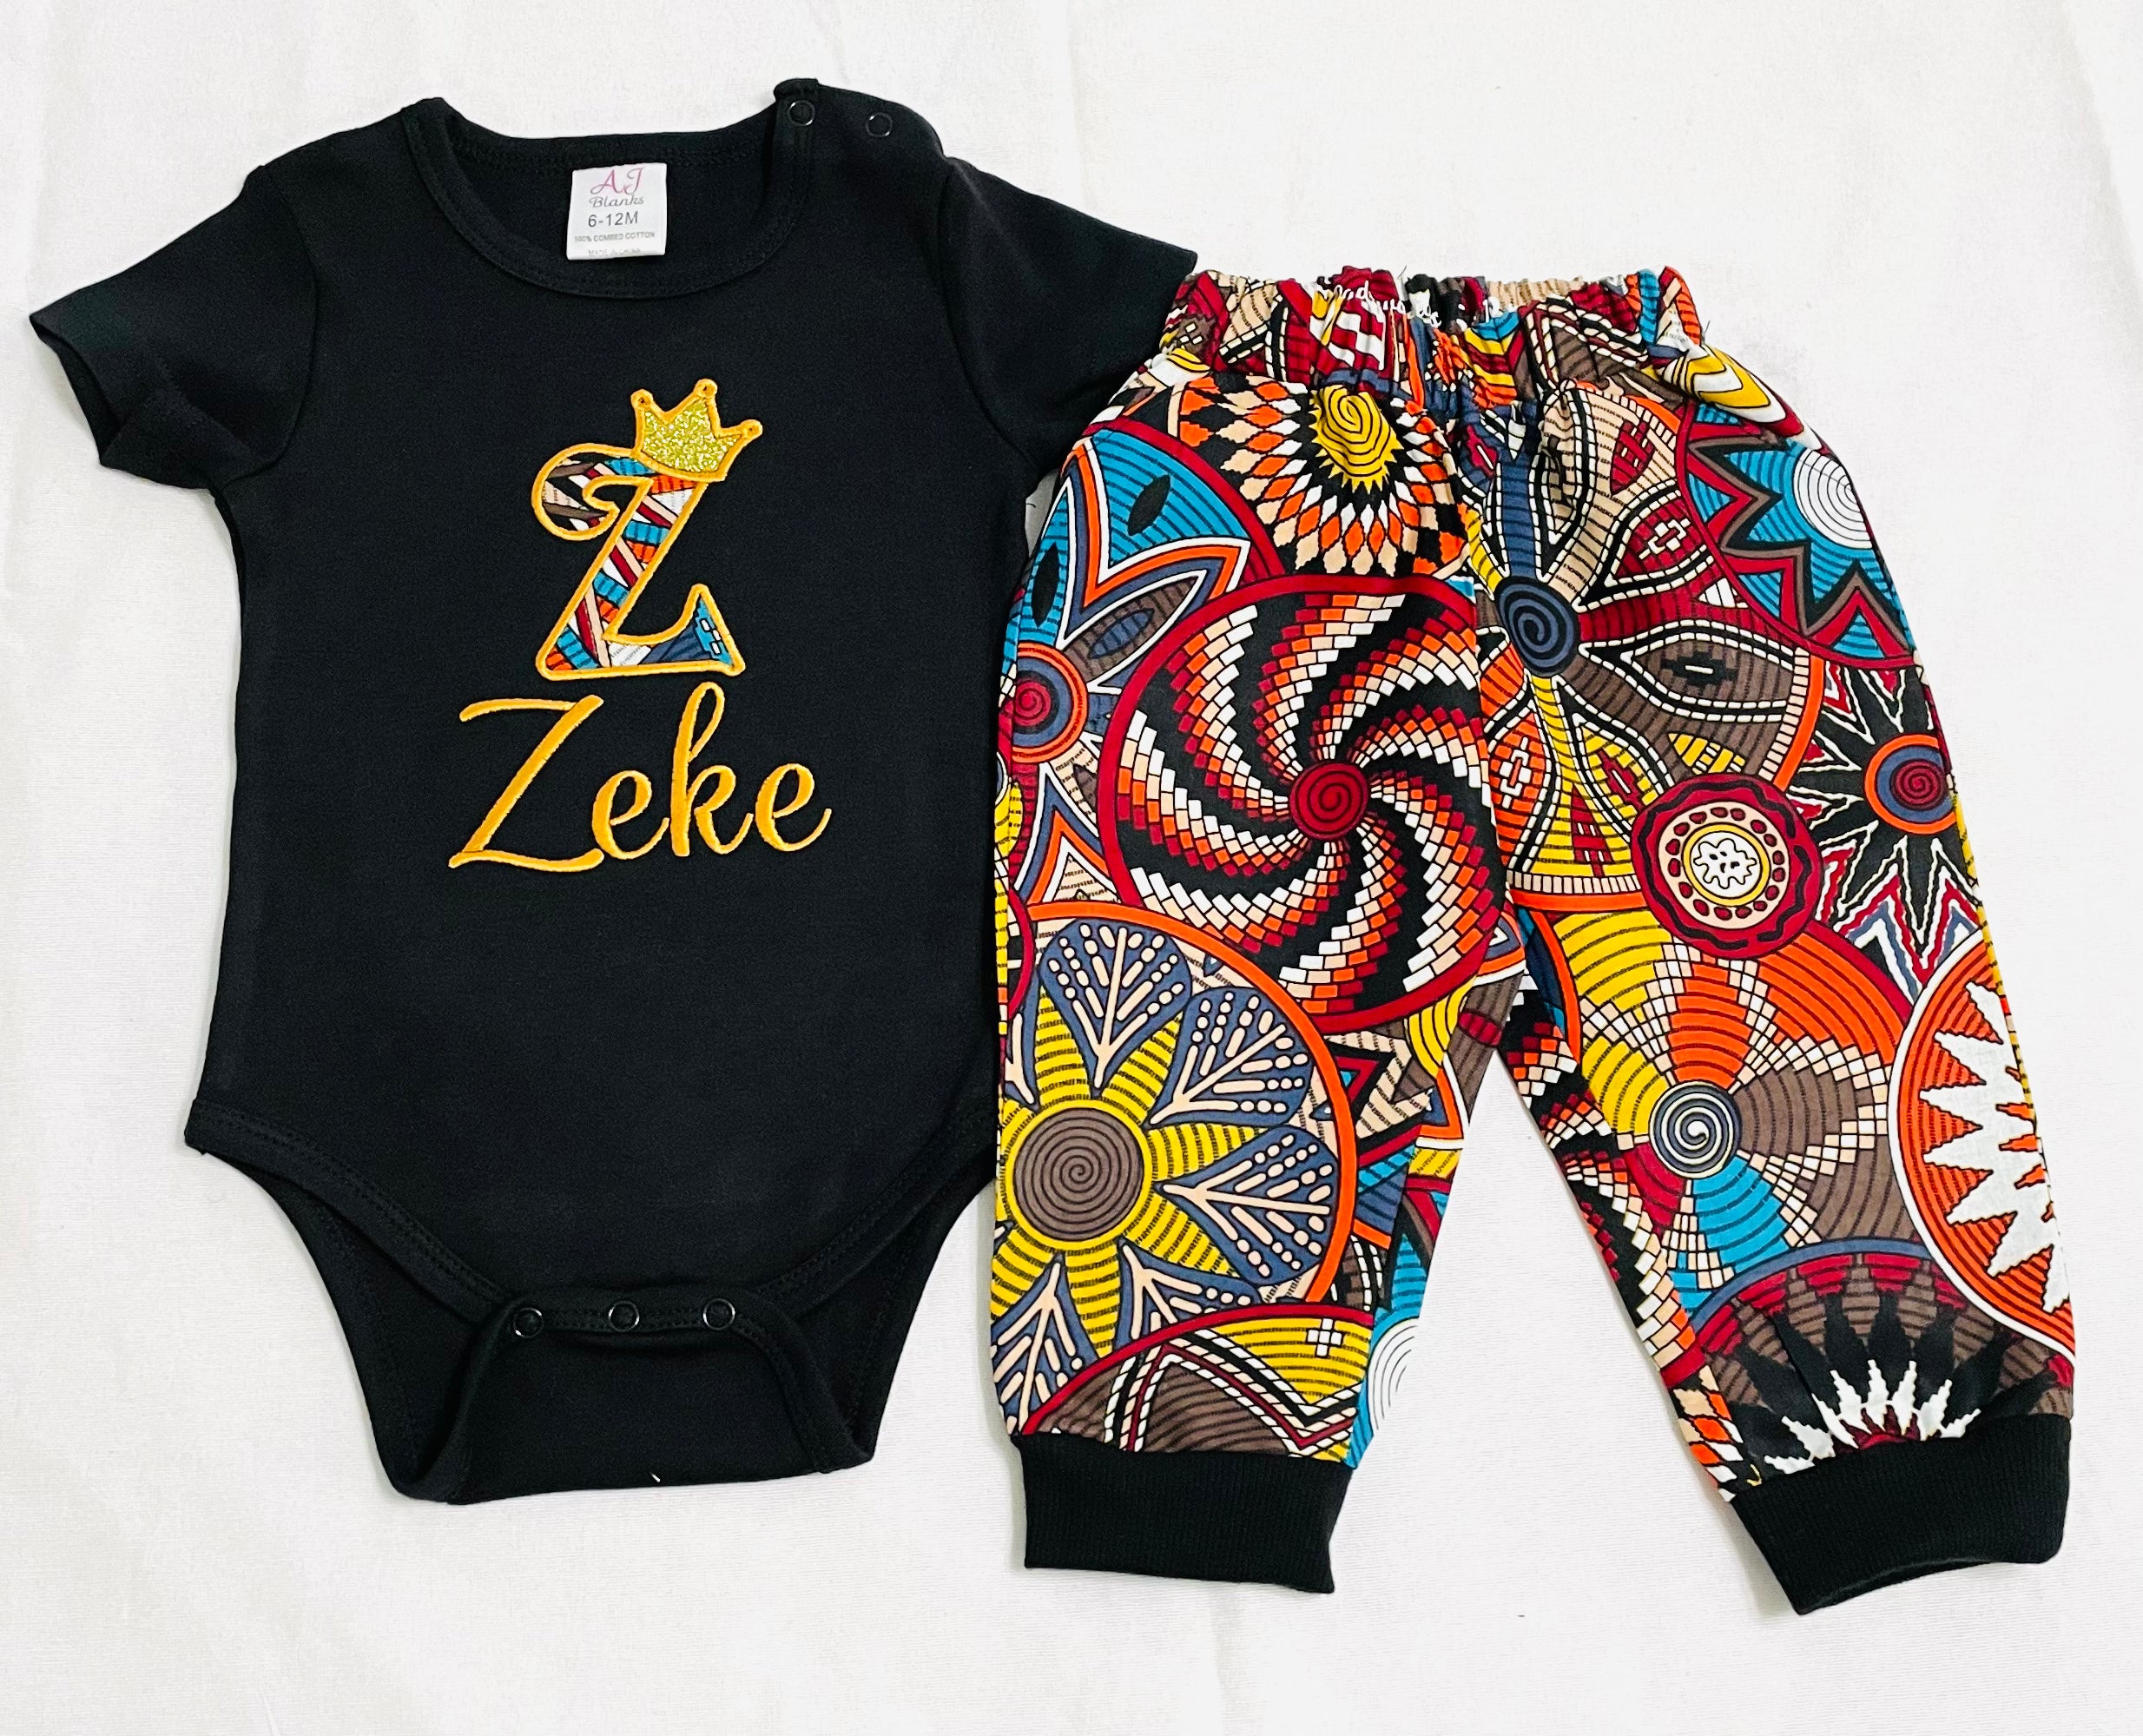 Kids pants and shirt outfit in African print